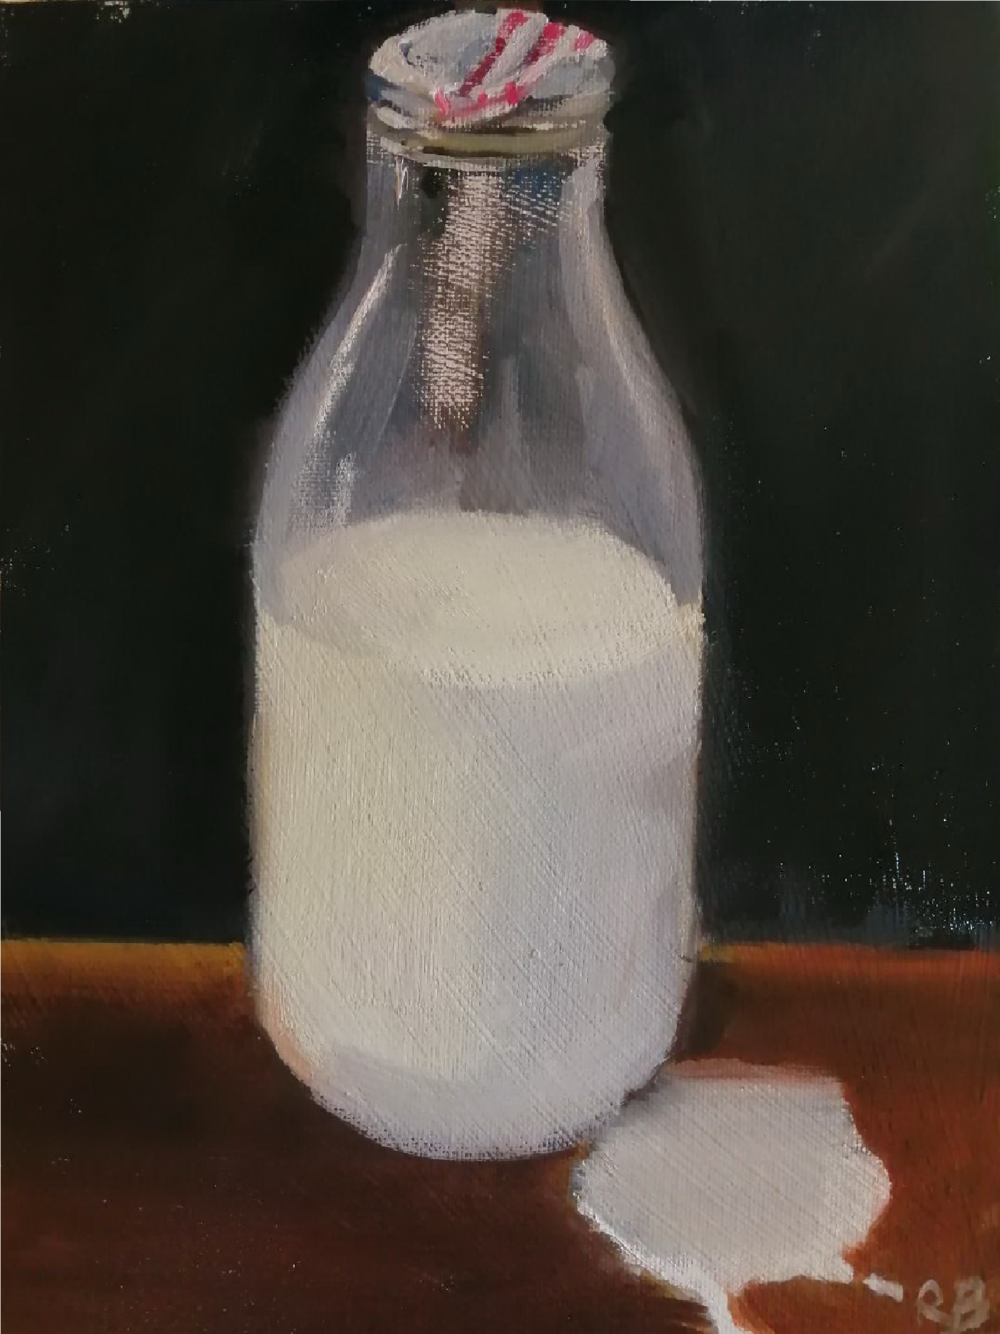  Spilt milk  Oil on board  26x20 cms  £275  This still life painting of a simple bottle of milk is typical of this artist’s love for the everyday object, and the use of it to convey more abstract, or deeper themes...  spilt milk seeming appropriate a